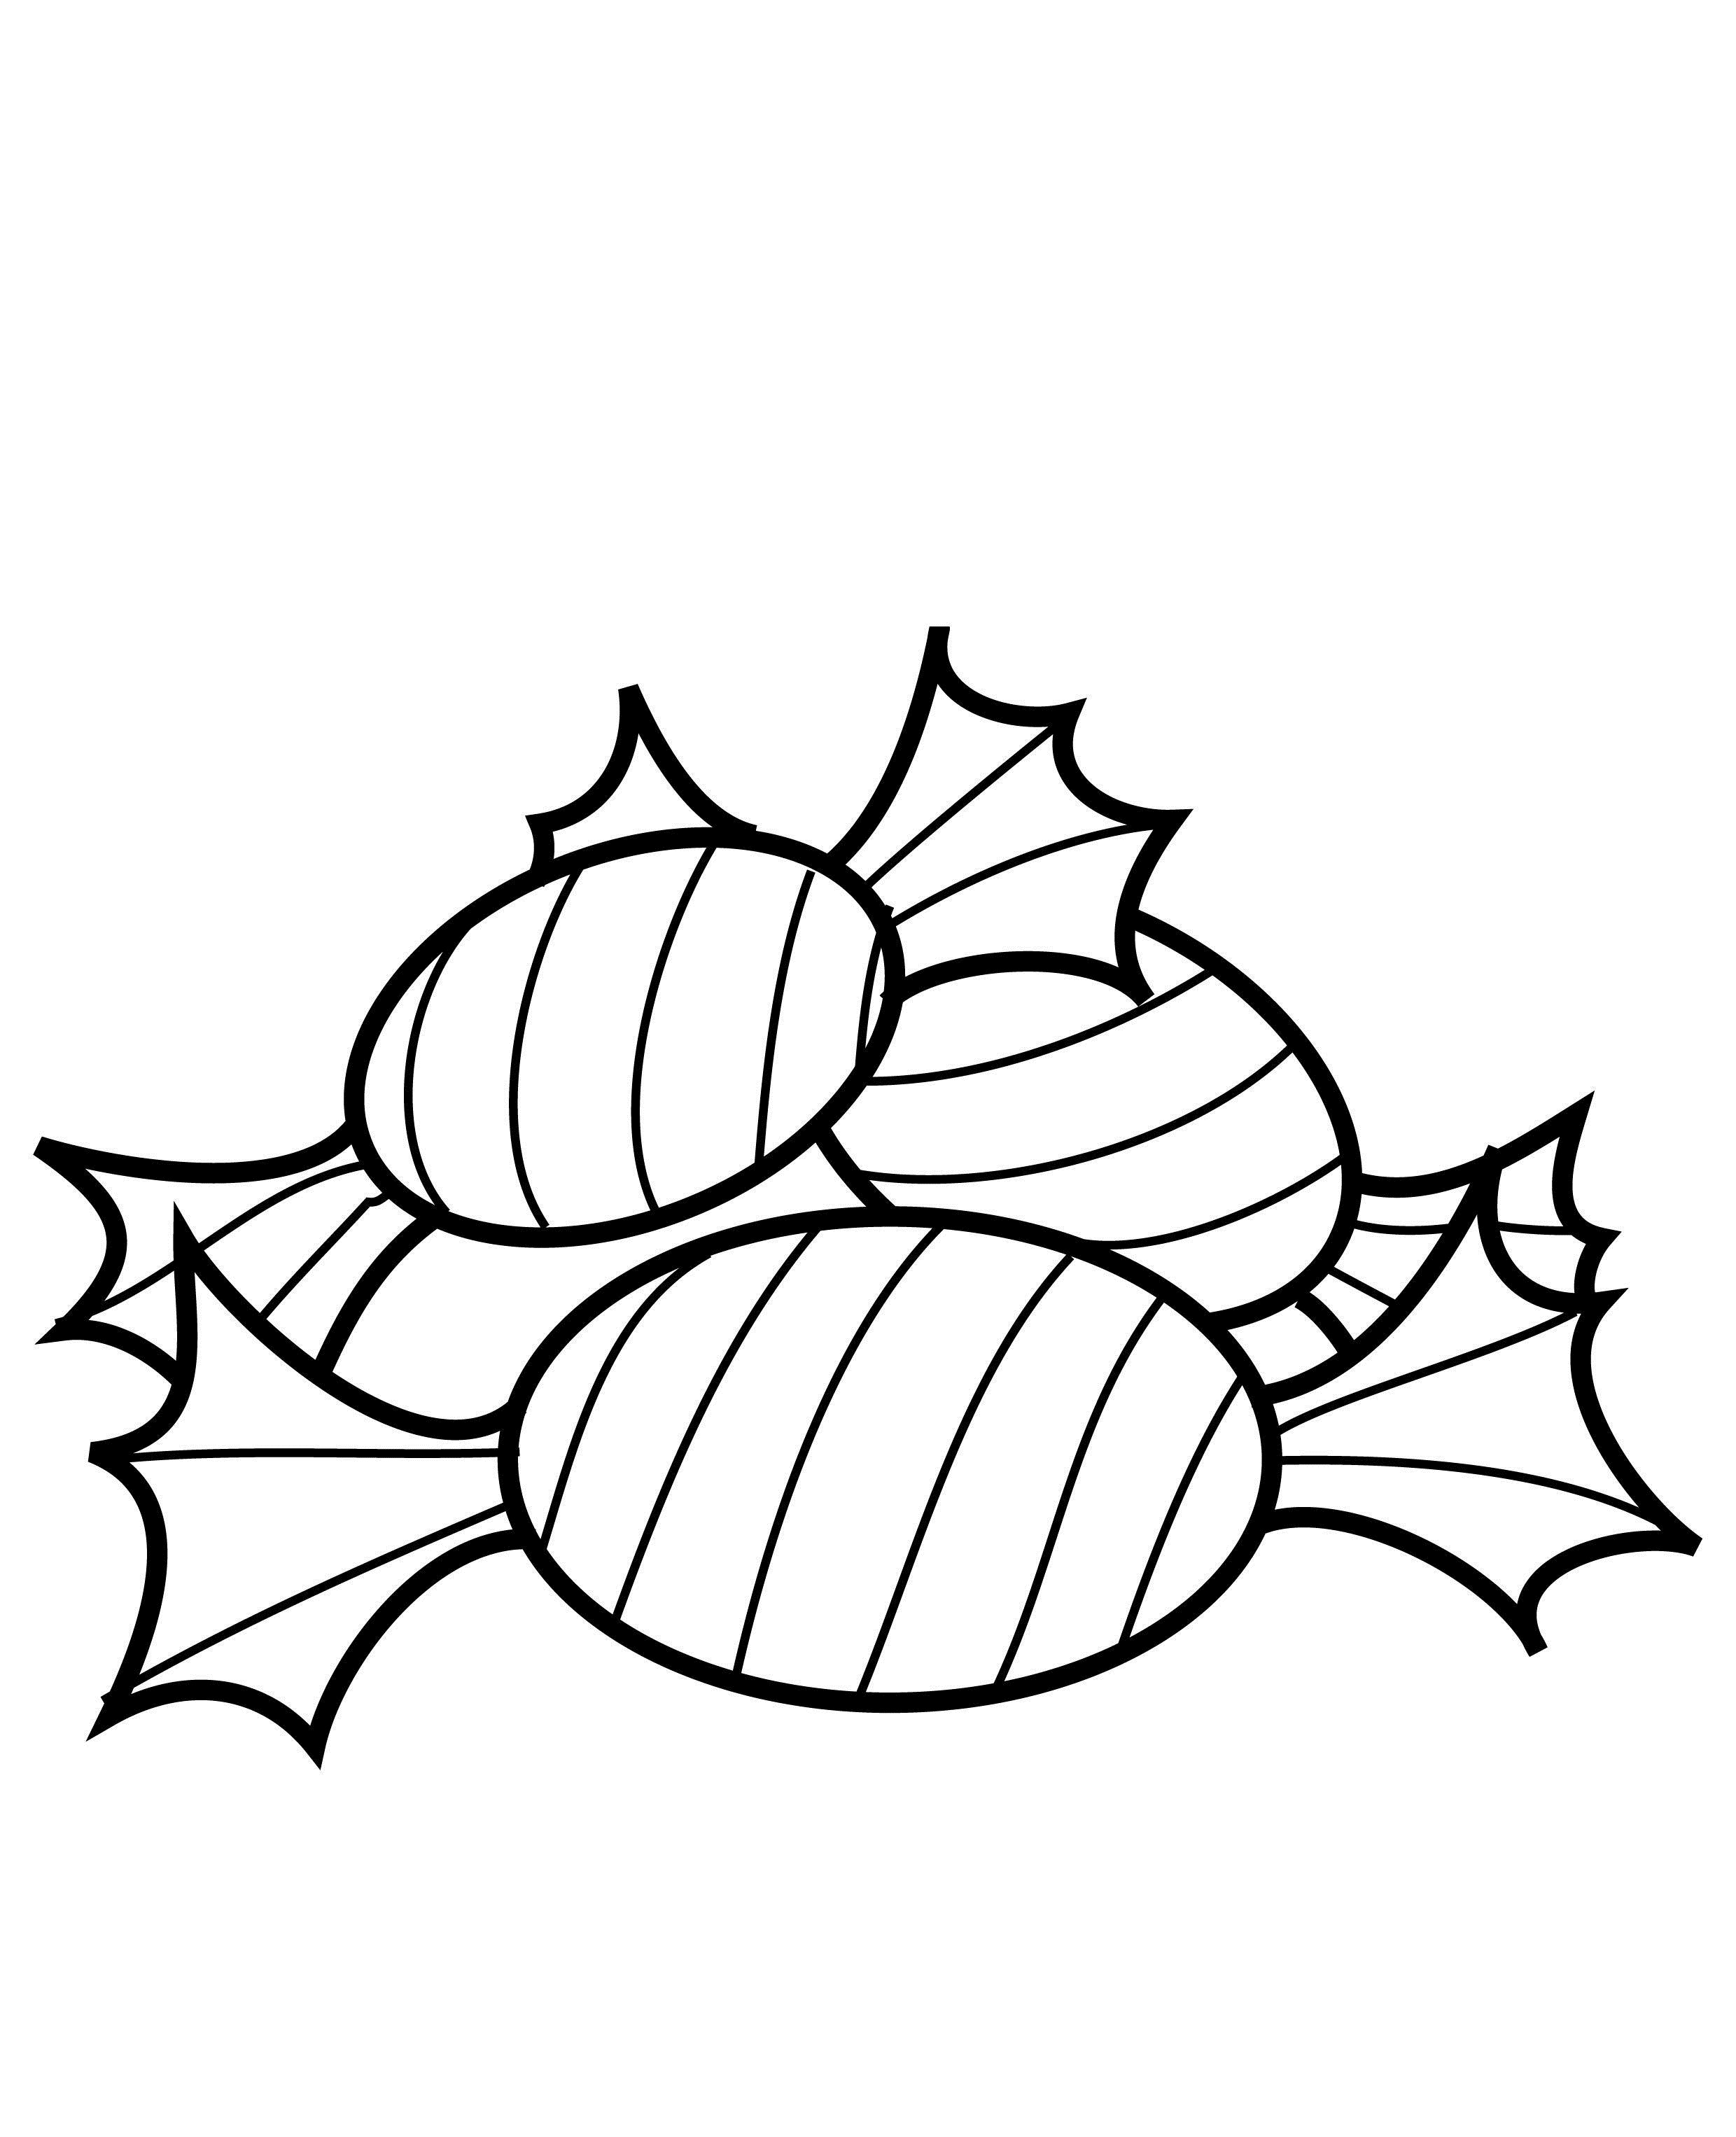 Coloring Sheet Starburst Candy Coloring Pages